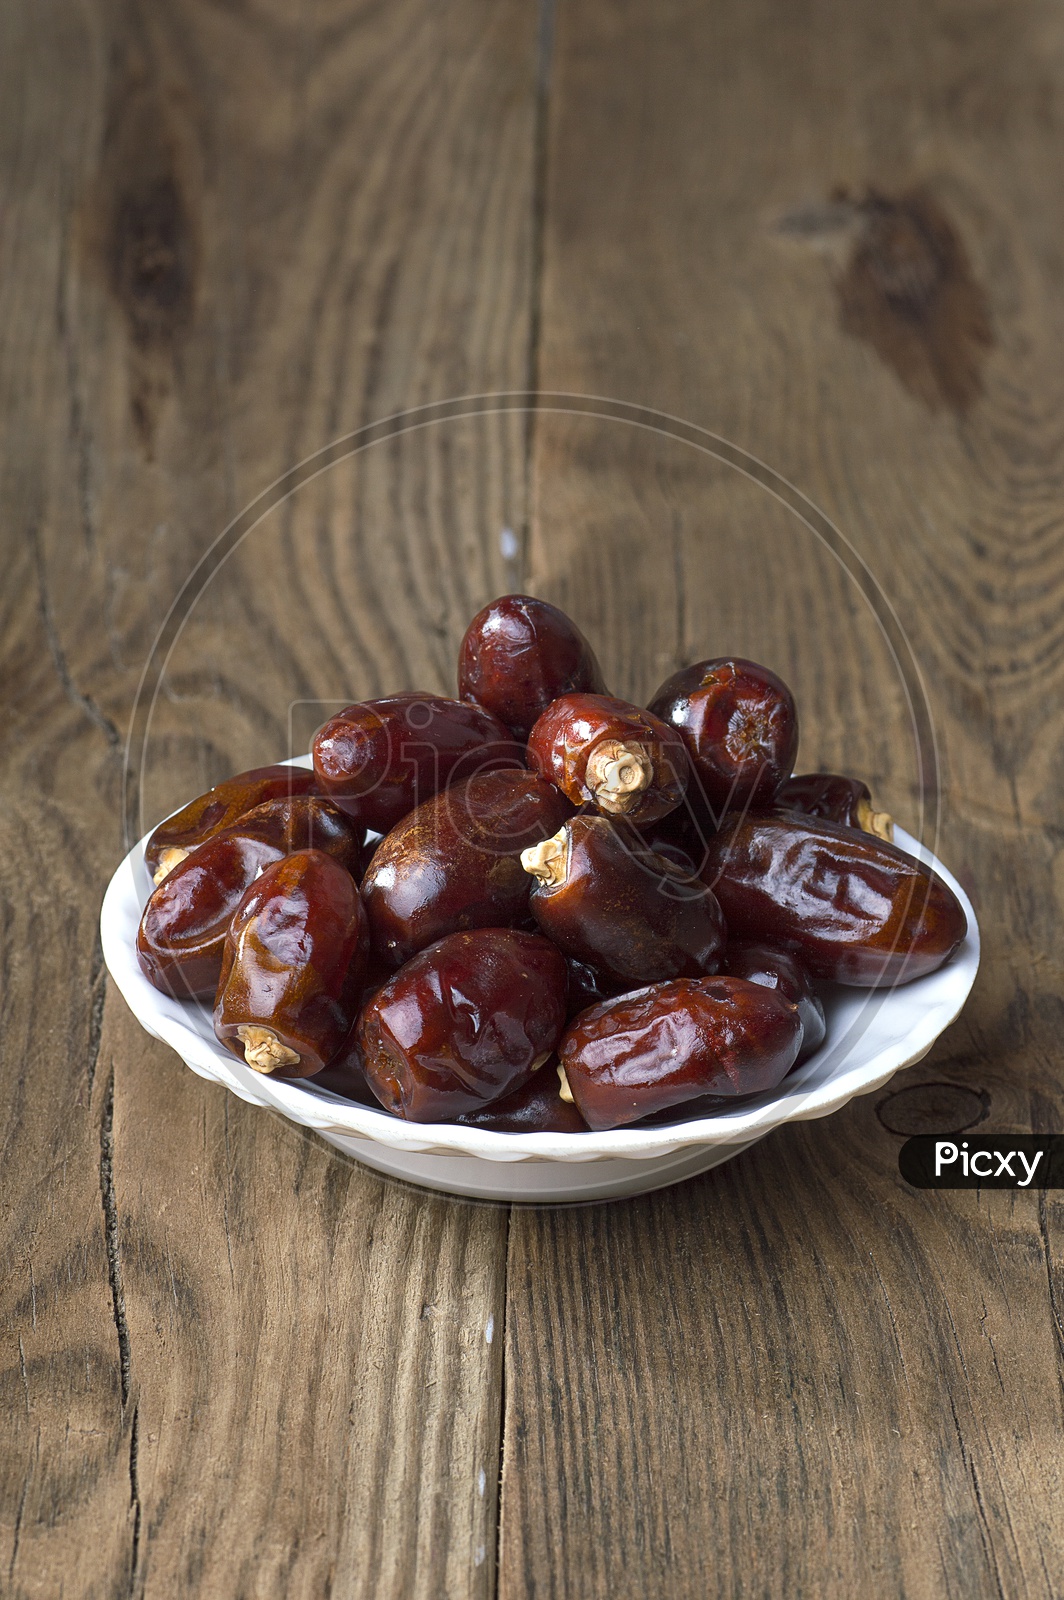 Dates in a white bowl on wooden backdrop